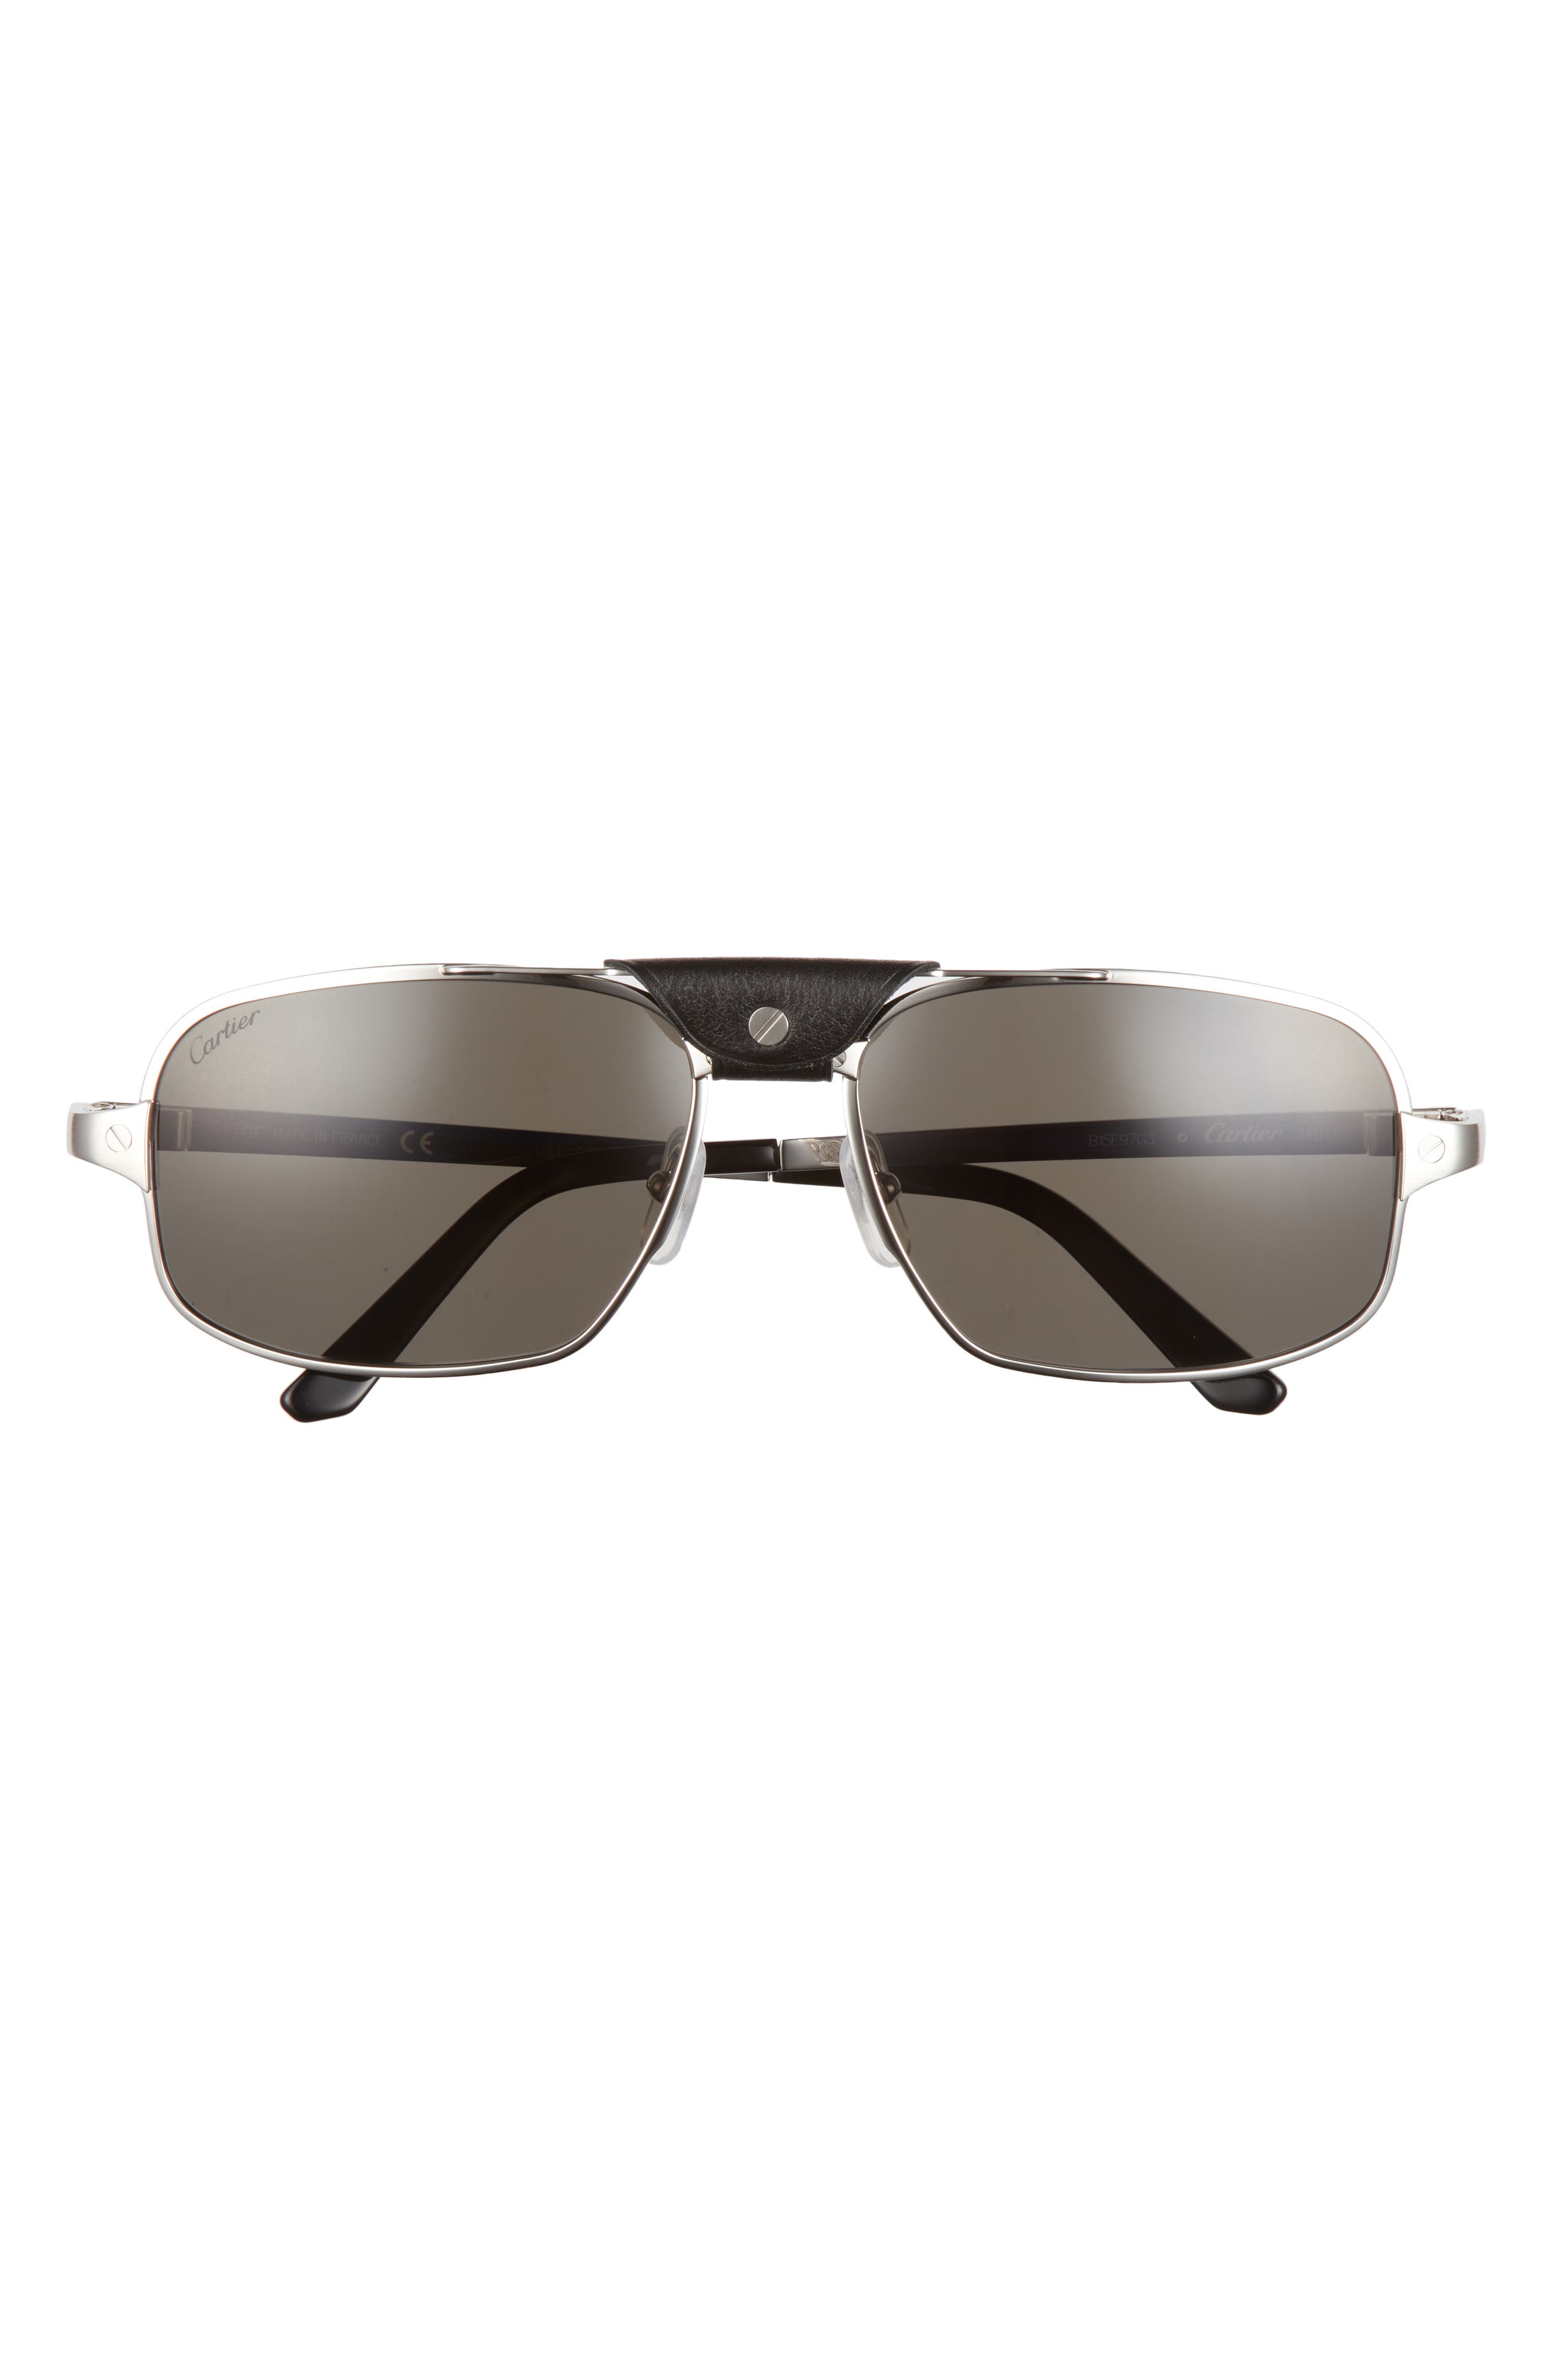 Cartier 60mm Polarized Aviator Sunglasses in Silver at Nordstrom